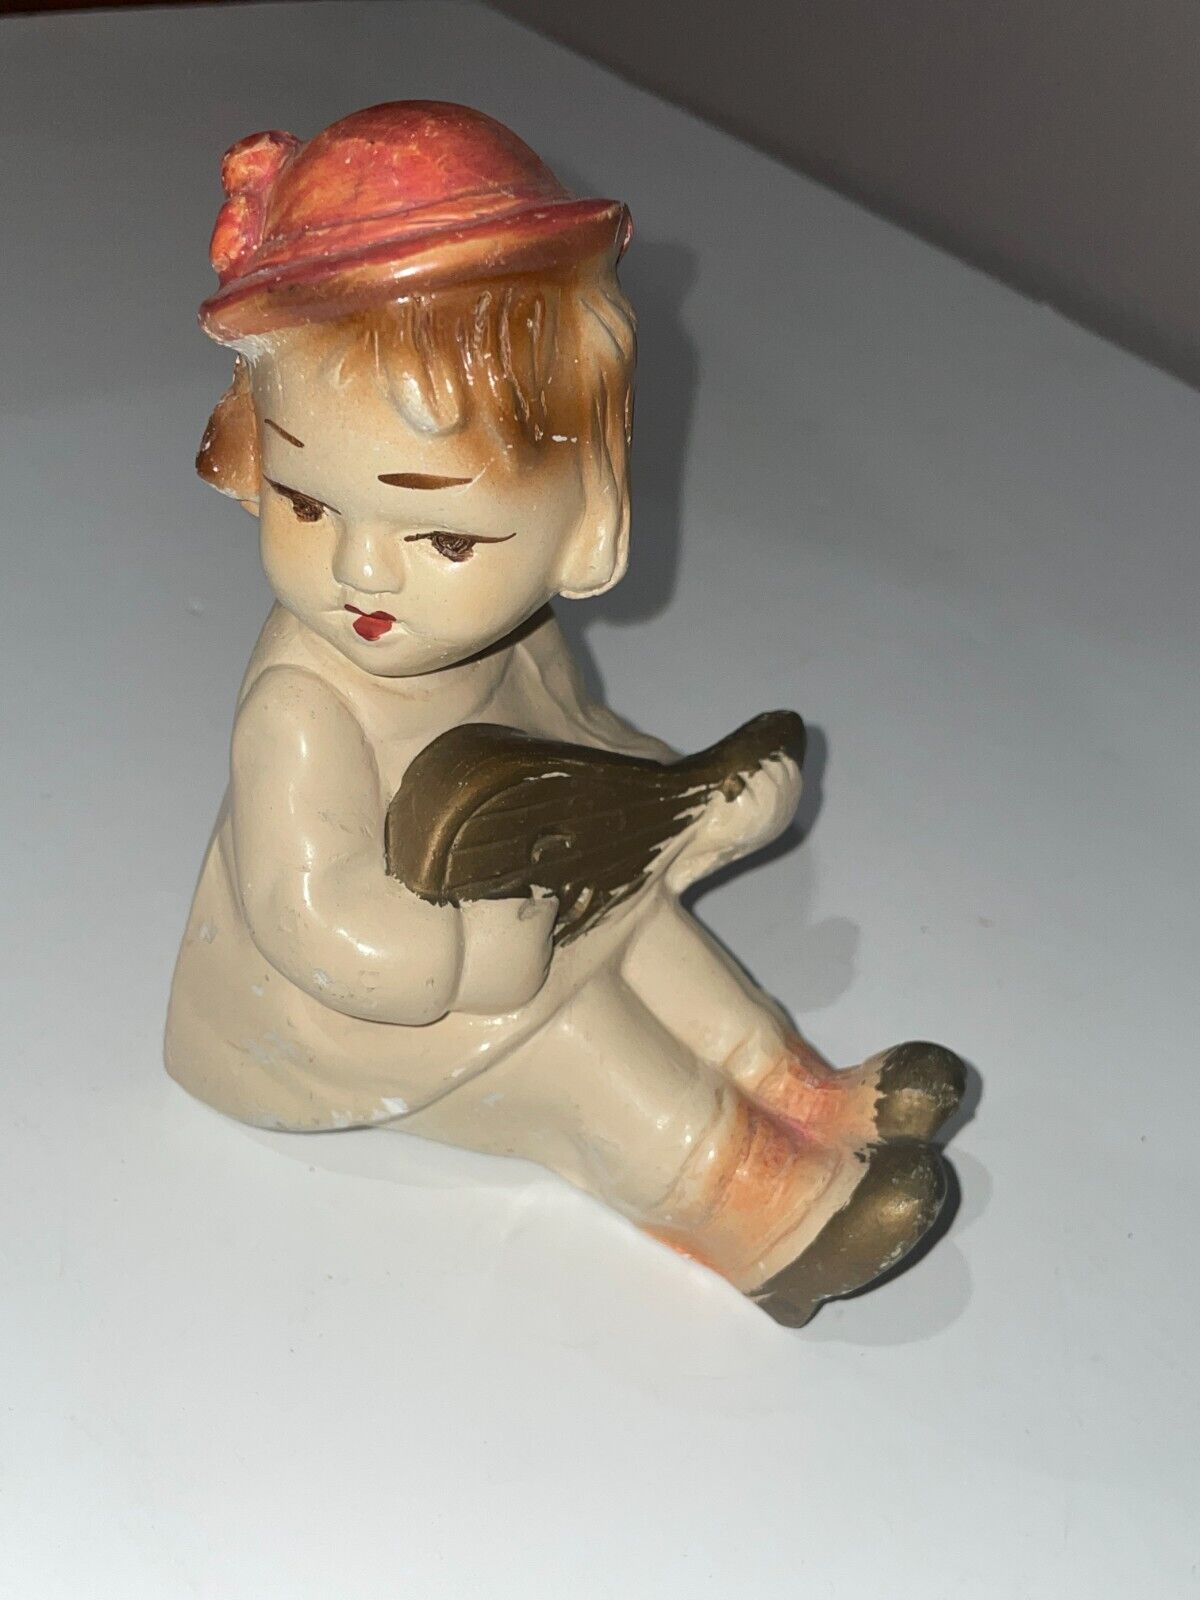 Antique Bisque Figurine Child playing Lute Music Shabby Vintage French Country